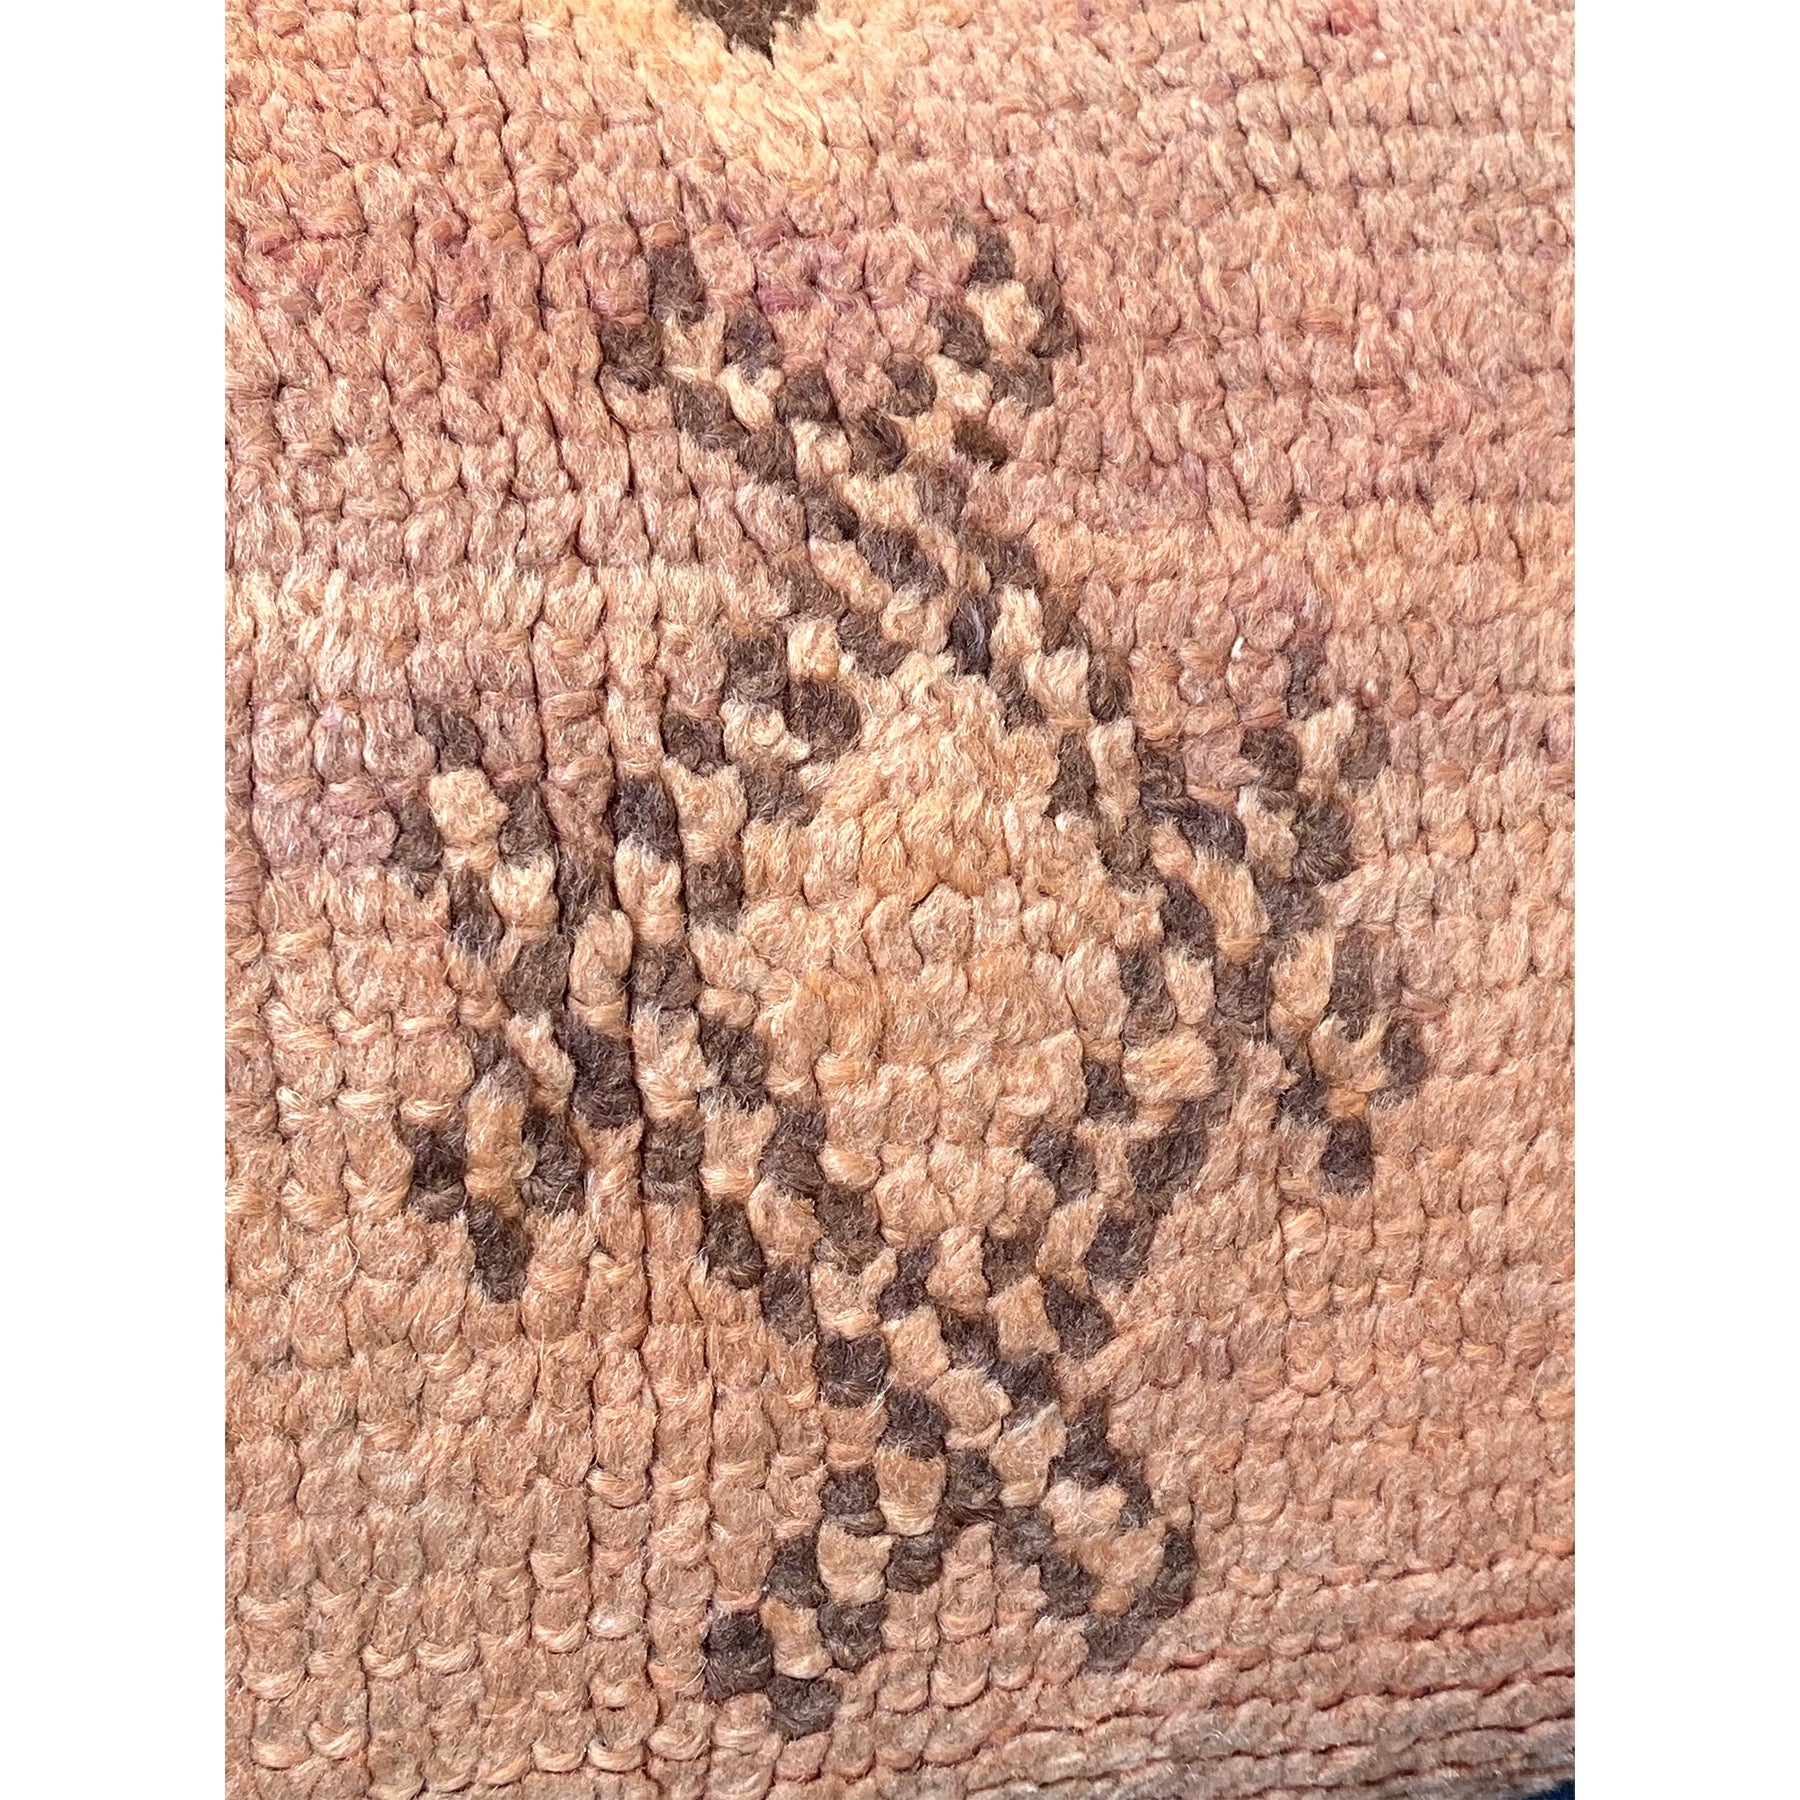 Pink vintage Moroccan throw pillow with brown details - Kantara | Moroccan Rugs